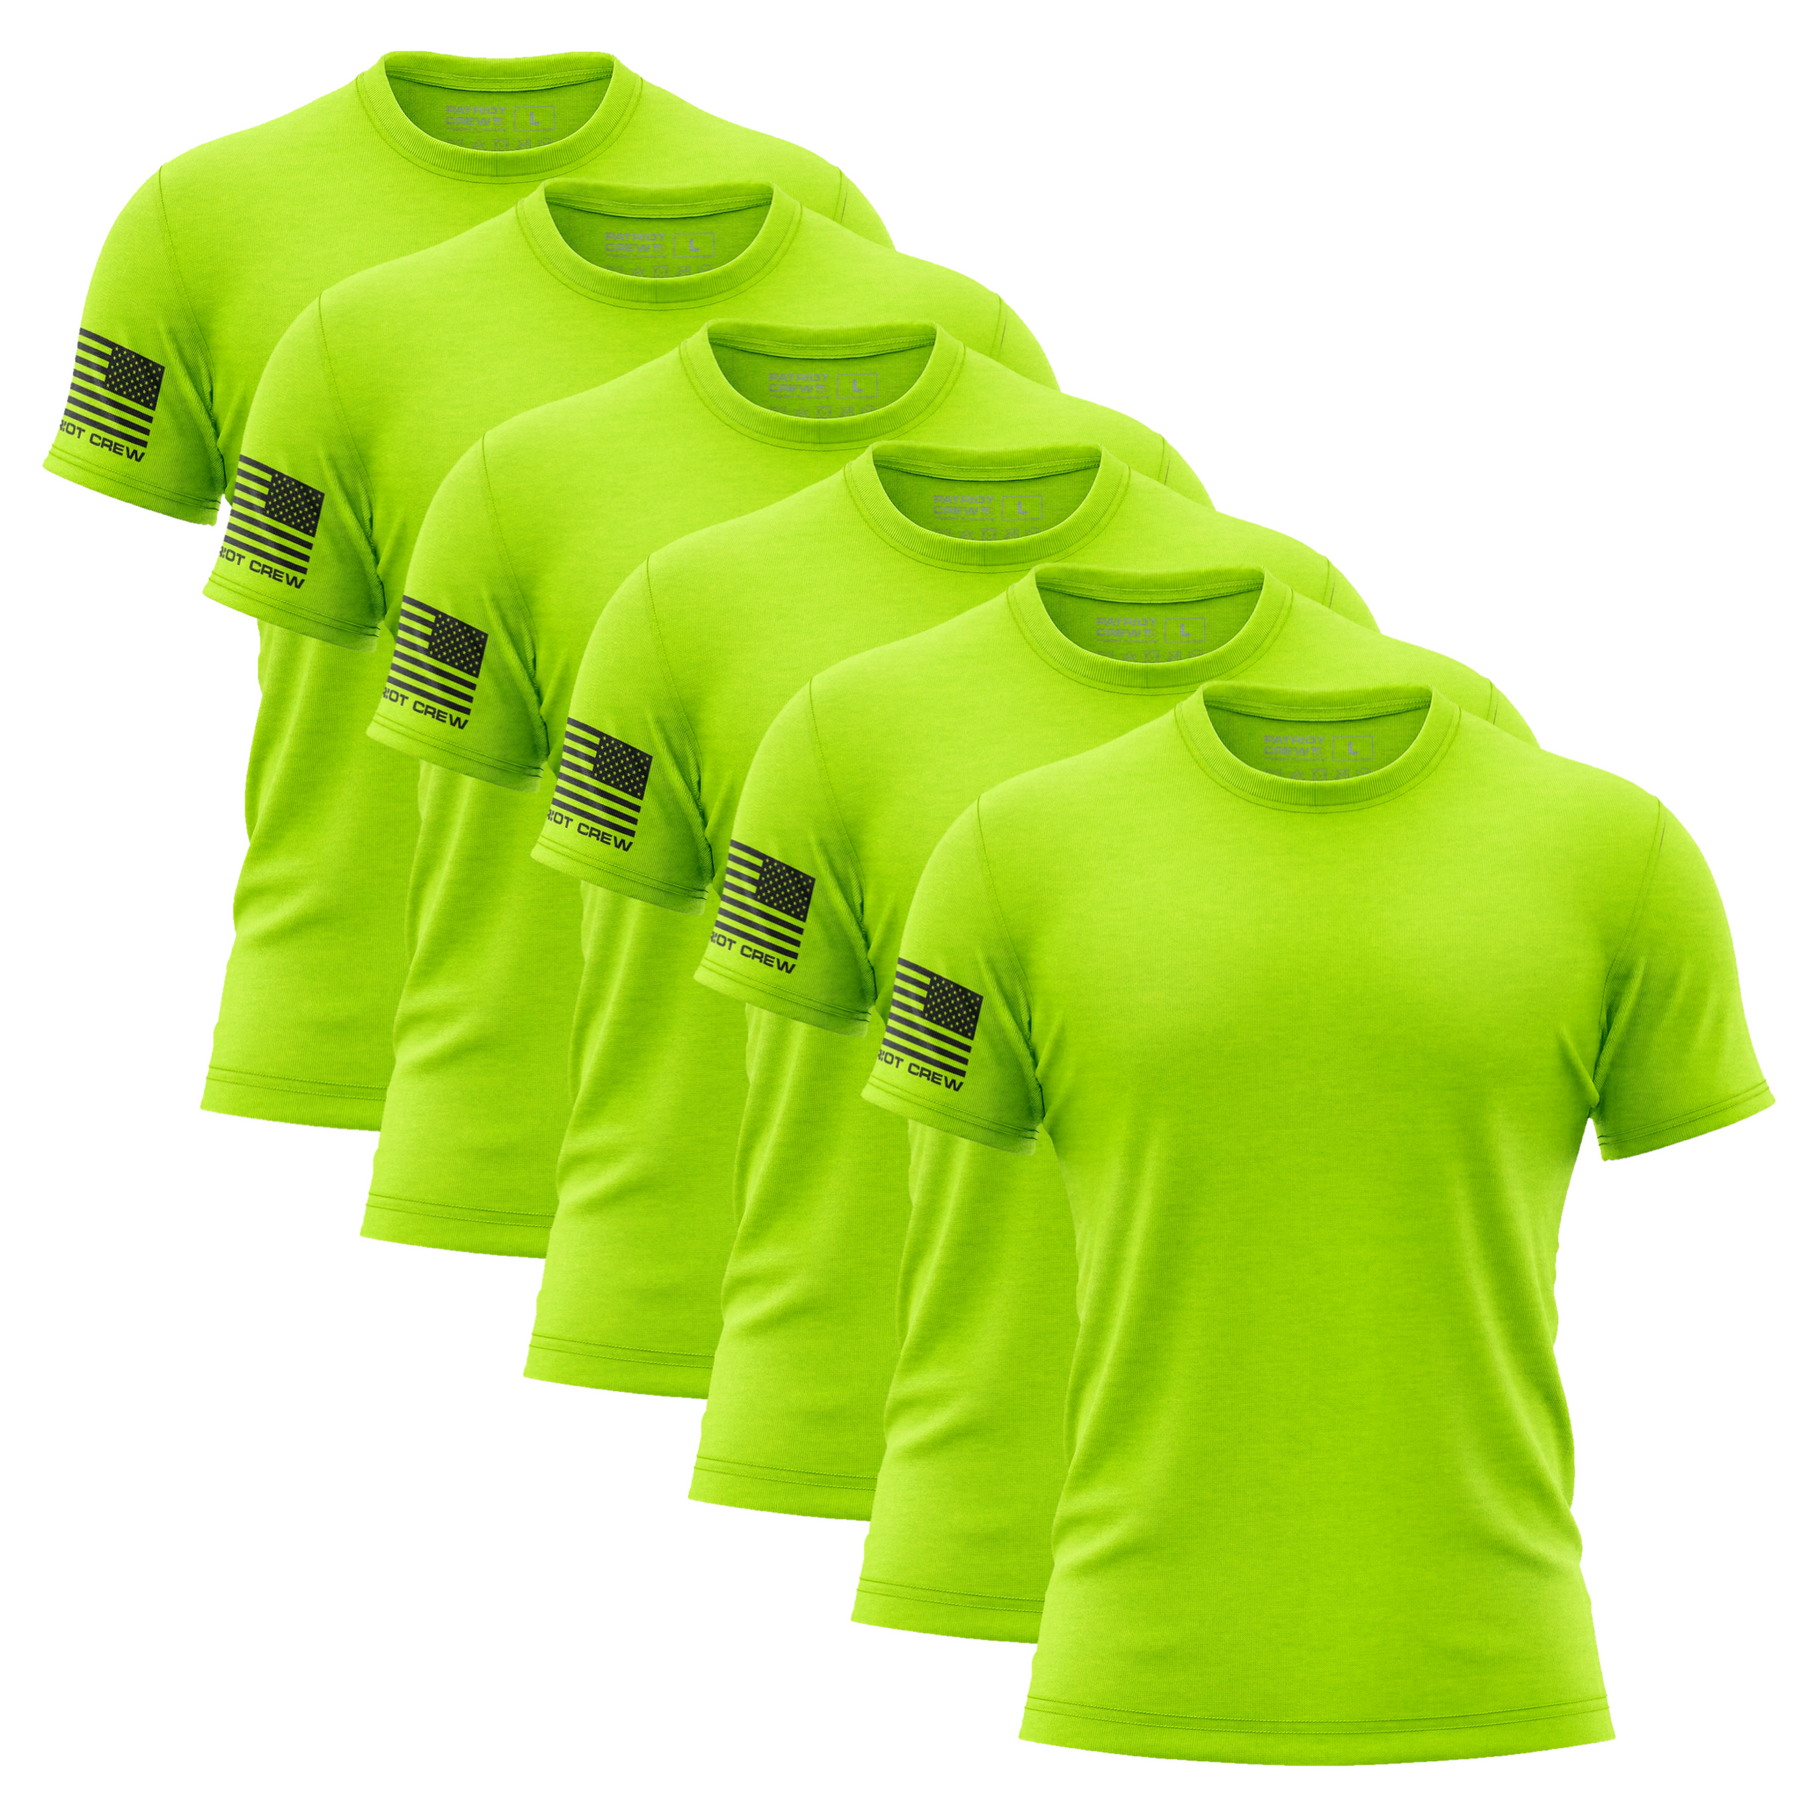 Safety Yellow T-Shirt (6 Pack)